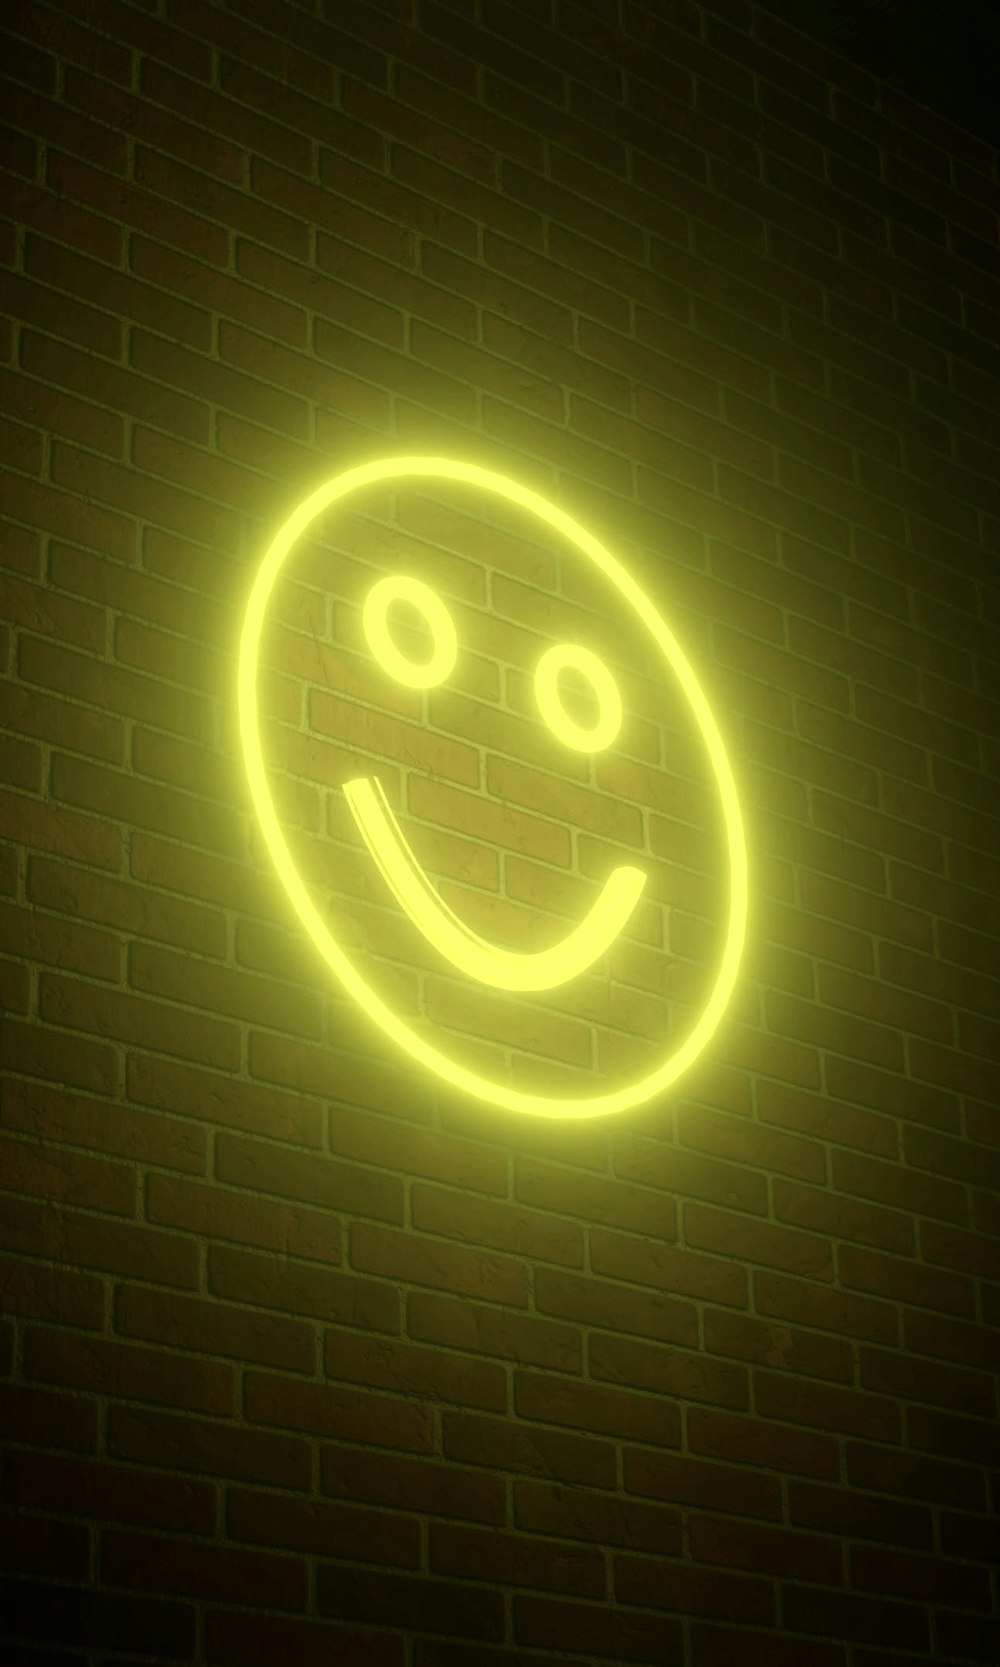 a smiley face neon sign on a brick wall